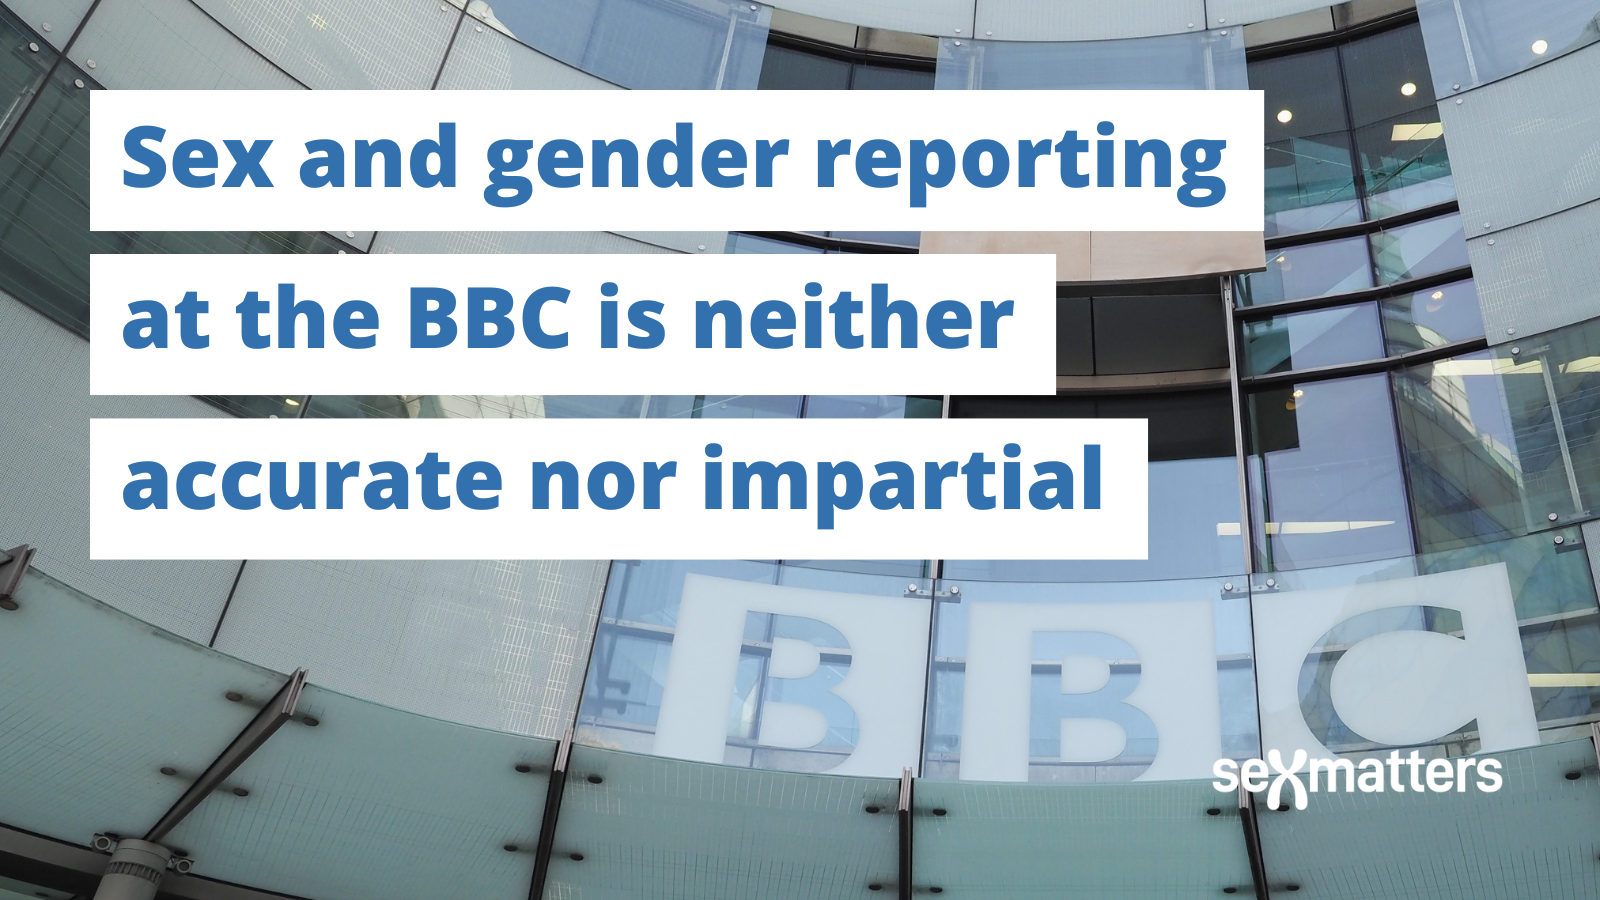 Sex and gender reporting at the BBC is neither accurate nor impartial